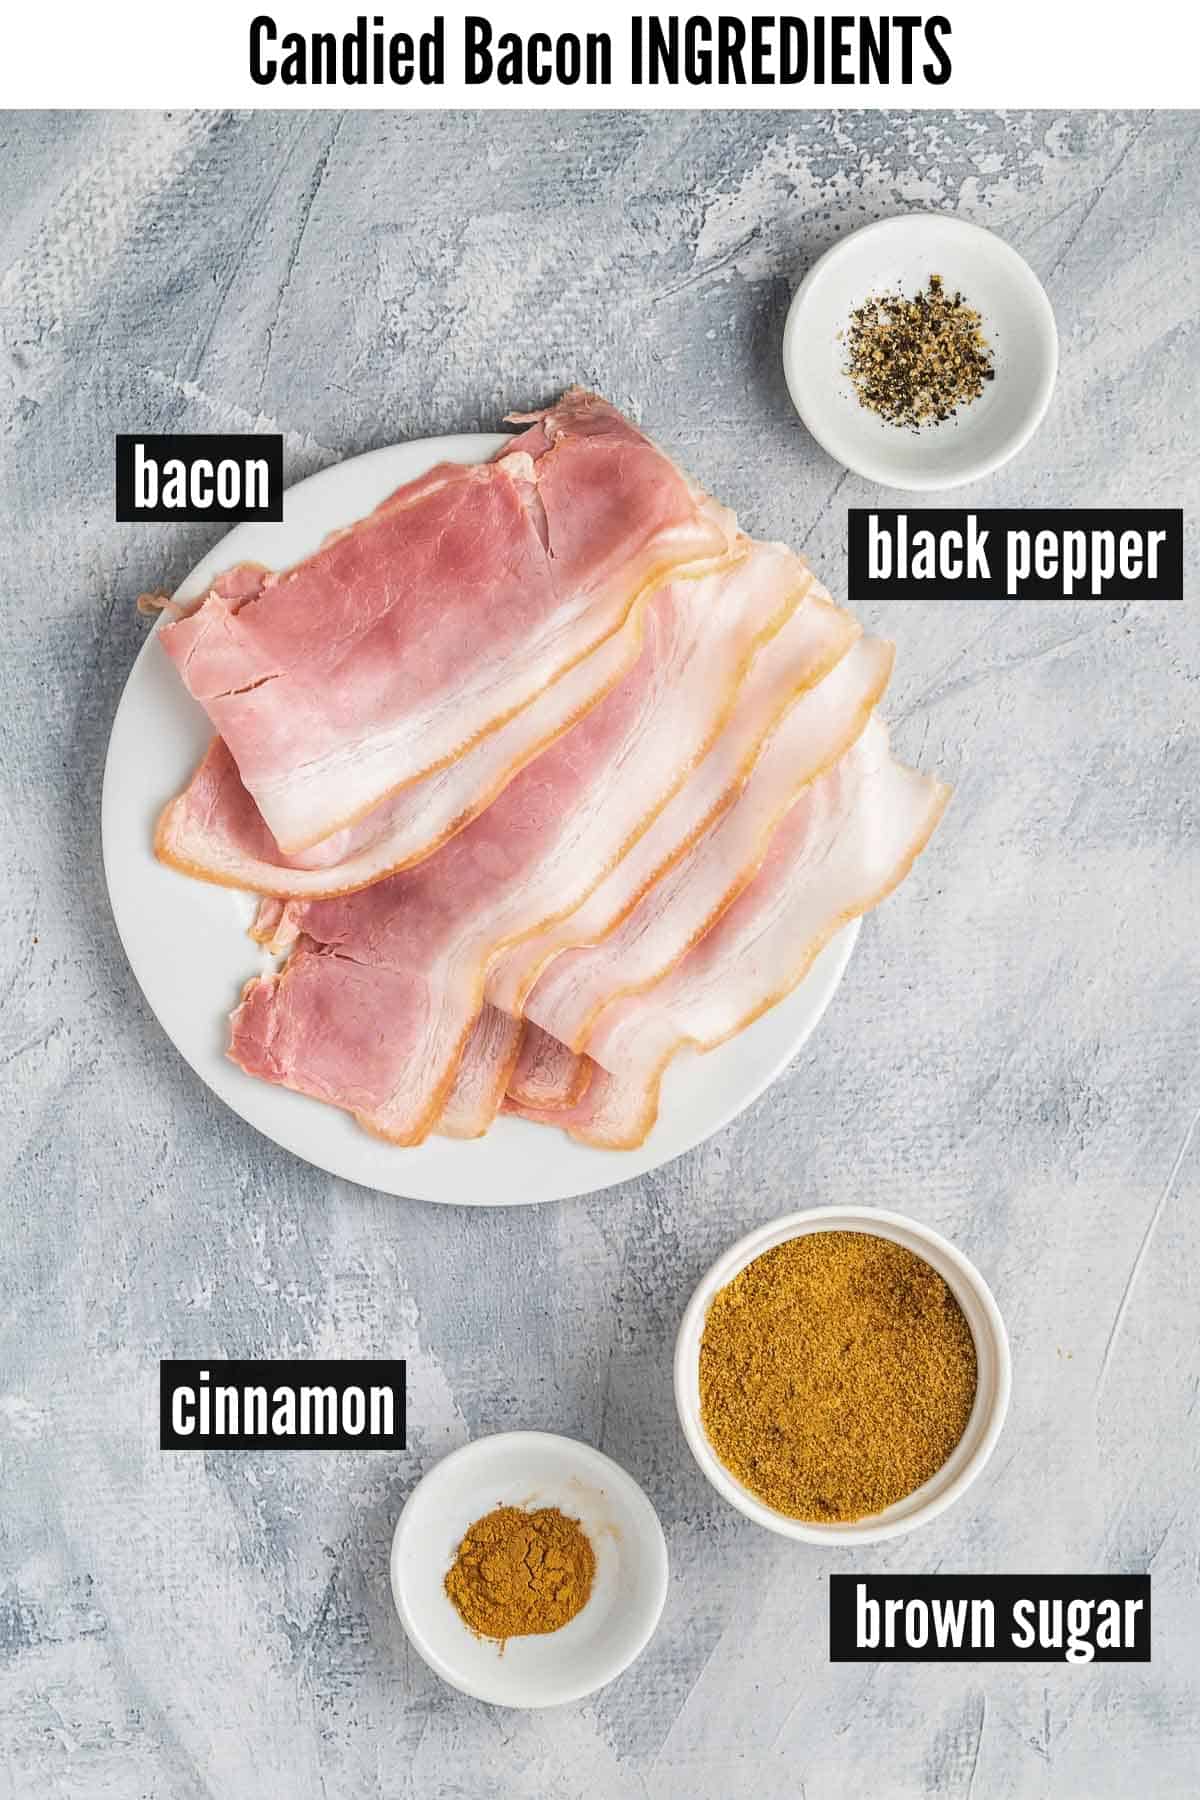 candied bacon labelled ingredients.